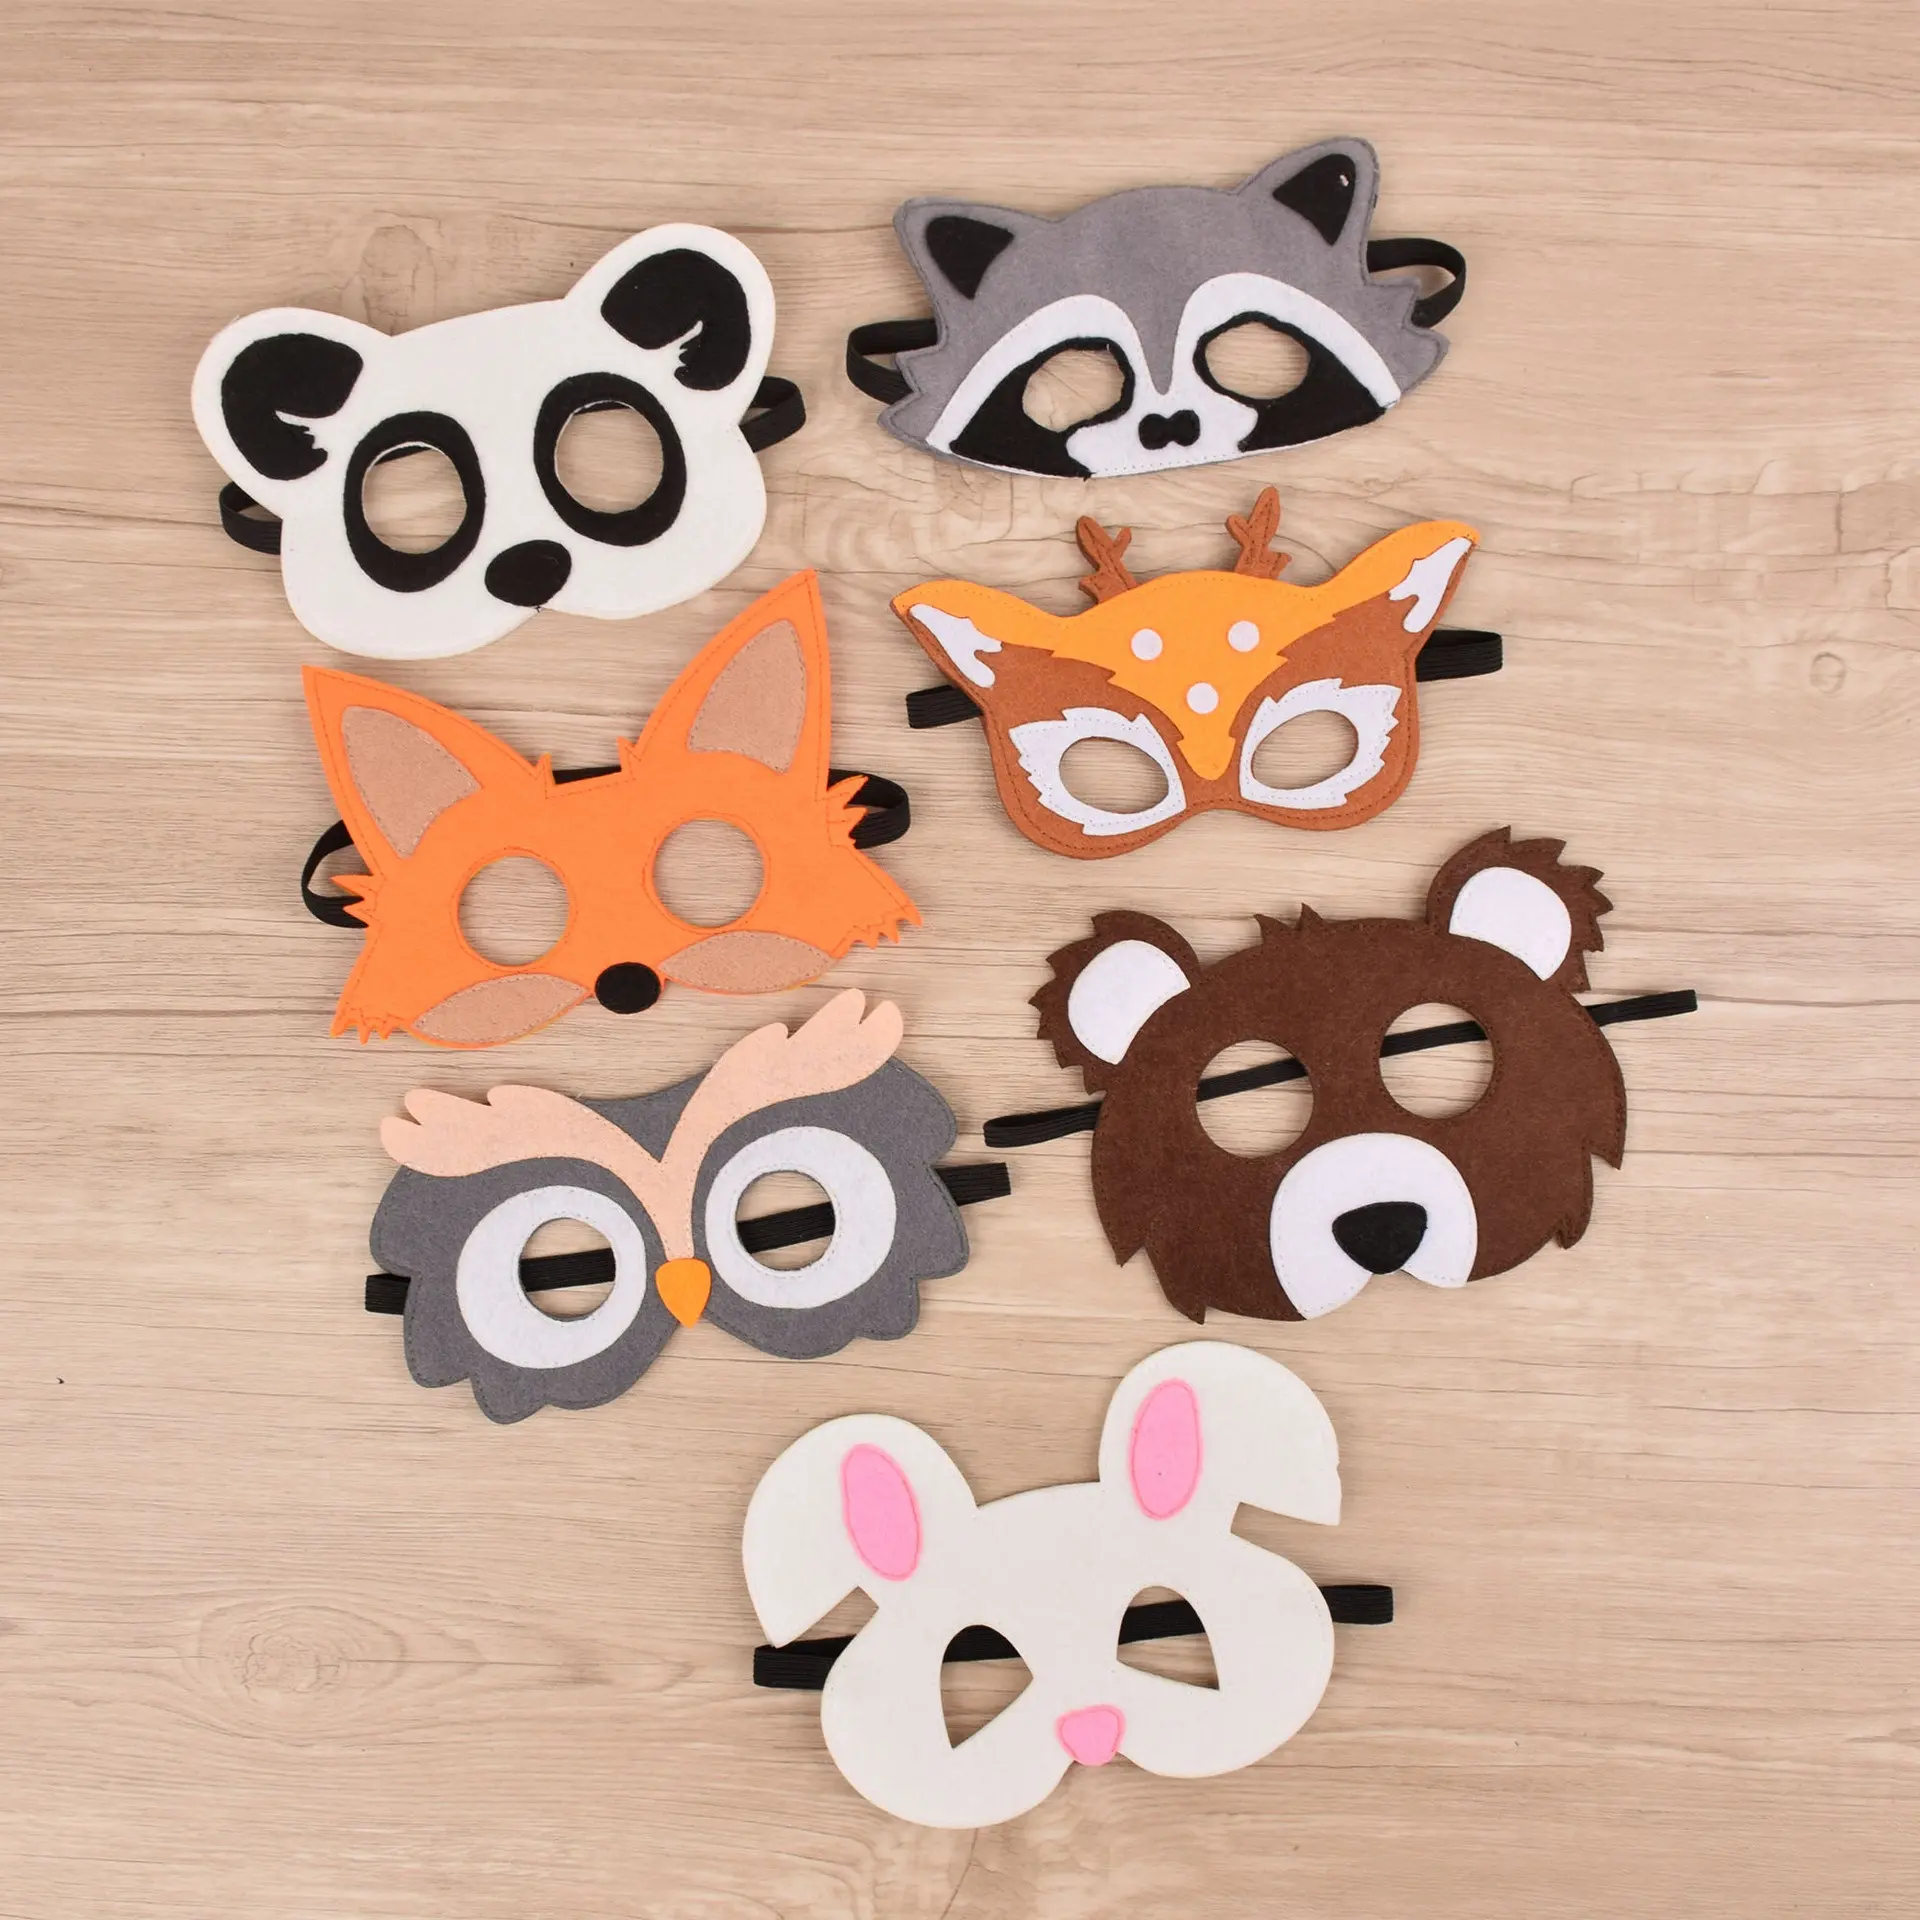 7 style Felt Mask Party Favors for Kid Themed Party Supplies Birthday Cosplay Mask Photo Booth Prop Cartoon Cosplay Gift